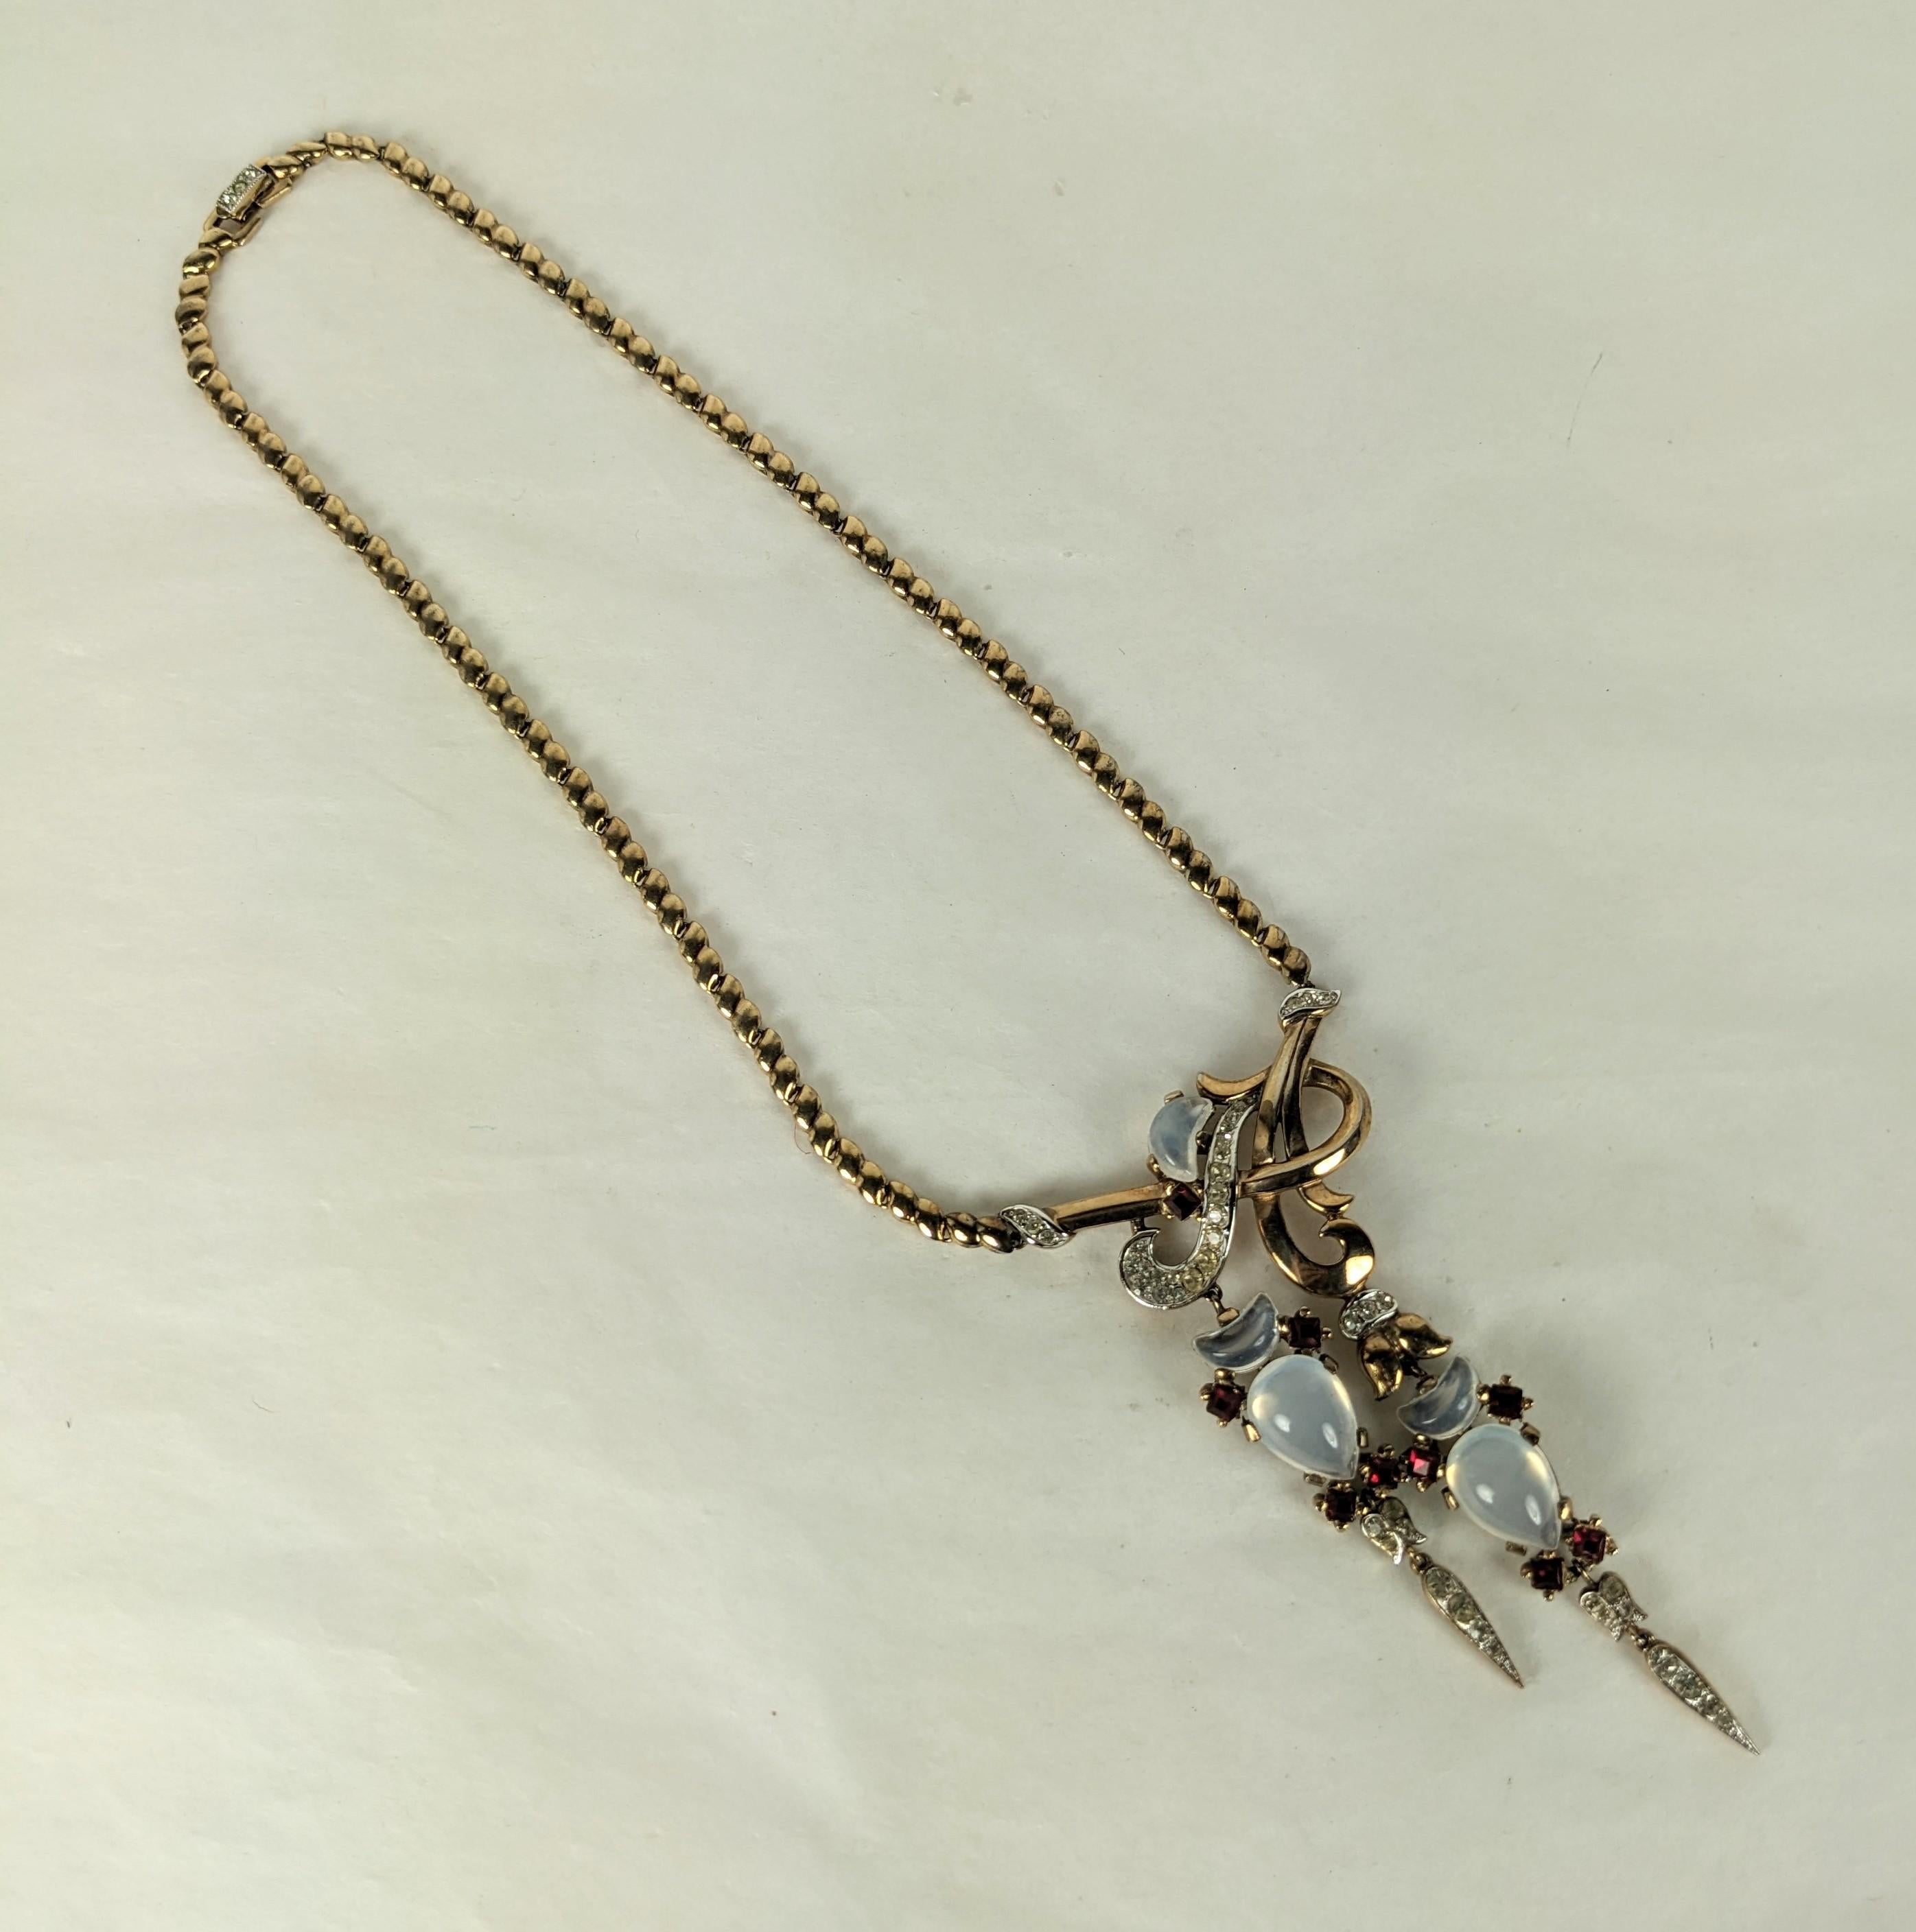 Rare Trifari Alfred Philippe, Clair de Lune collectible and elegant double drop retro necklace of pink gold plate metal, crystal rhinestones and faux demilune cut moonstones and rubies. Excellent Condition. Marked: Trifari with Crown, 1950's USA.